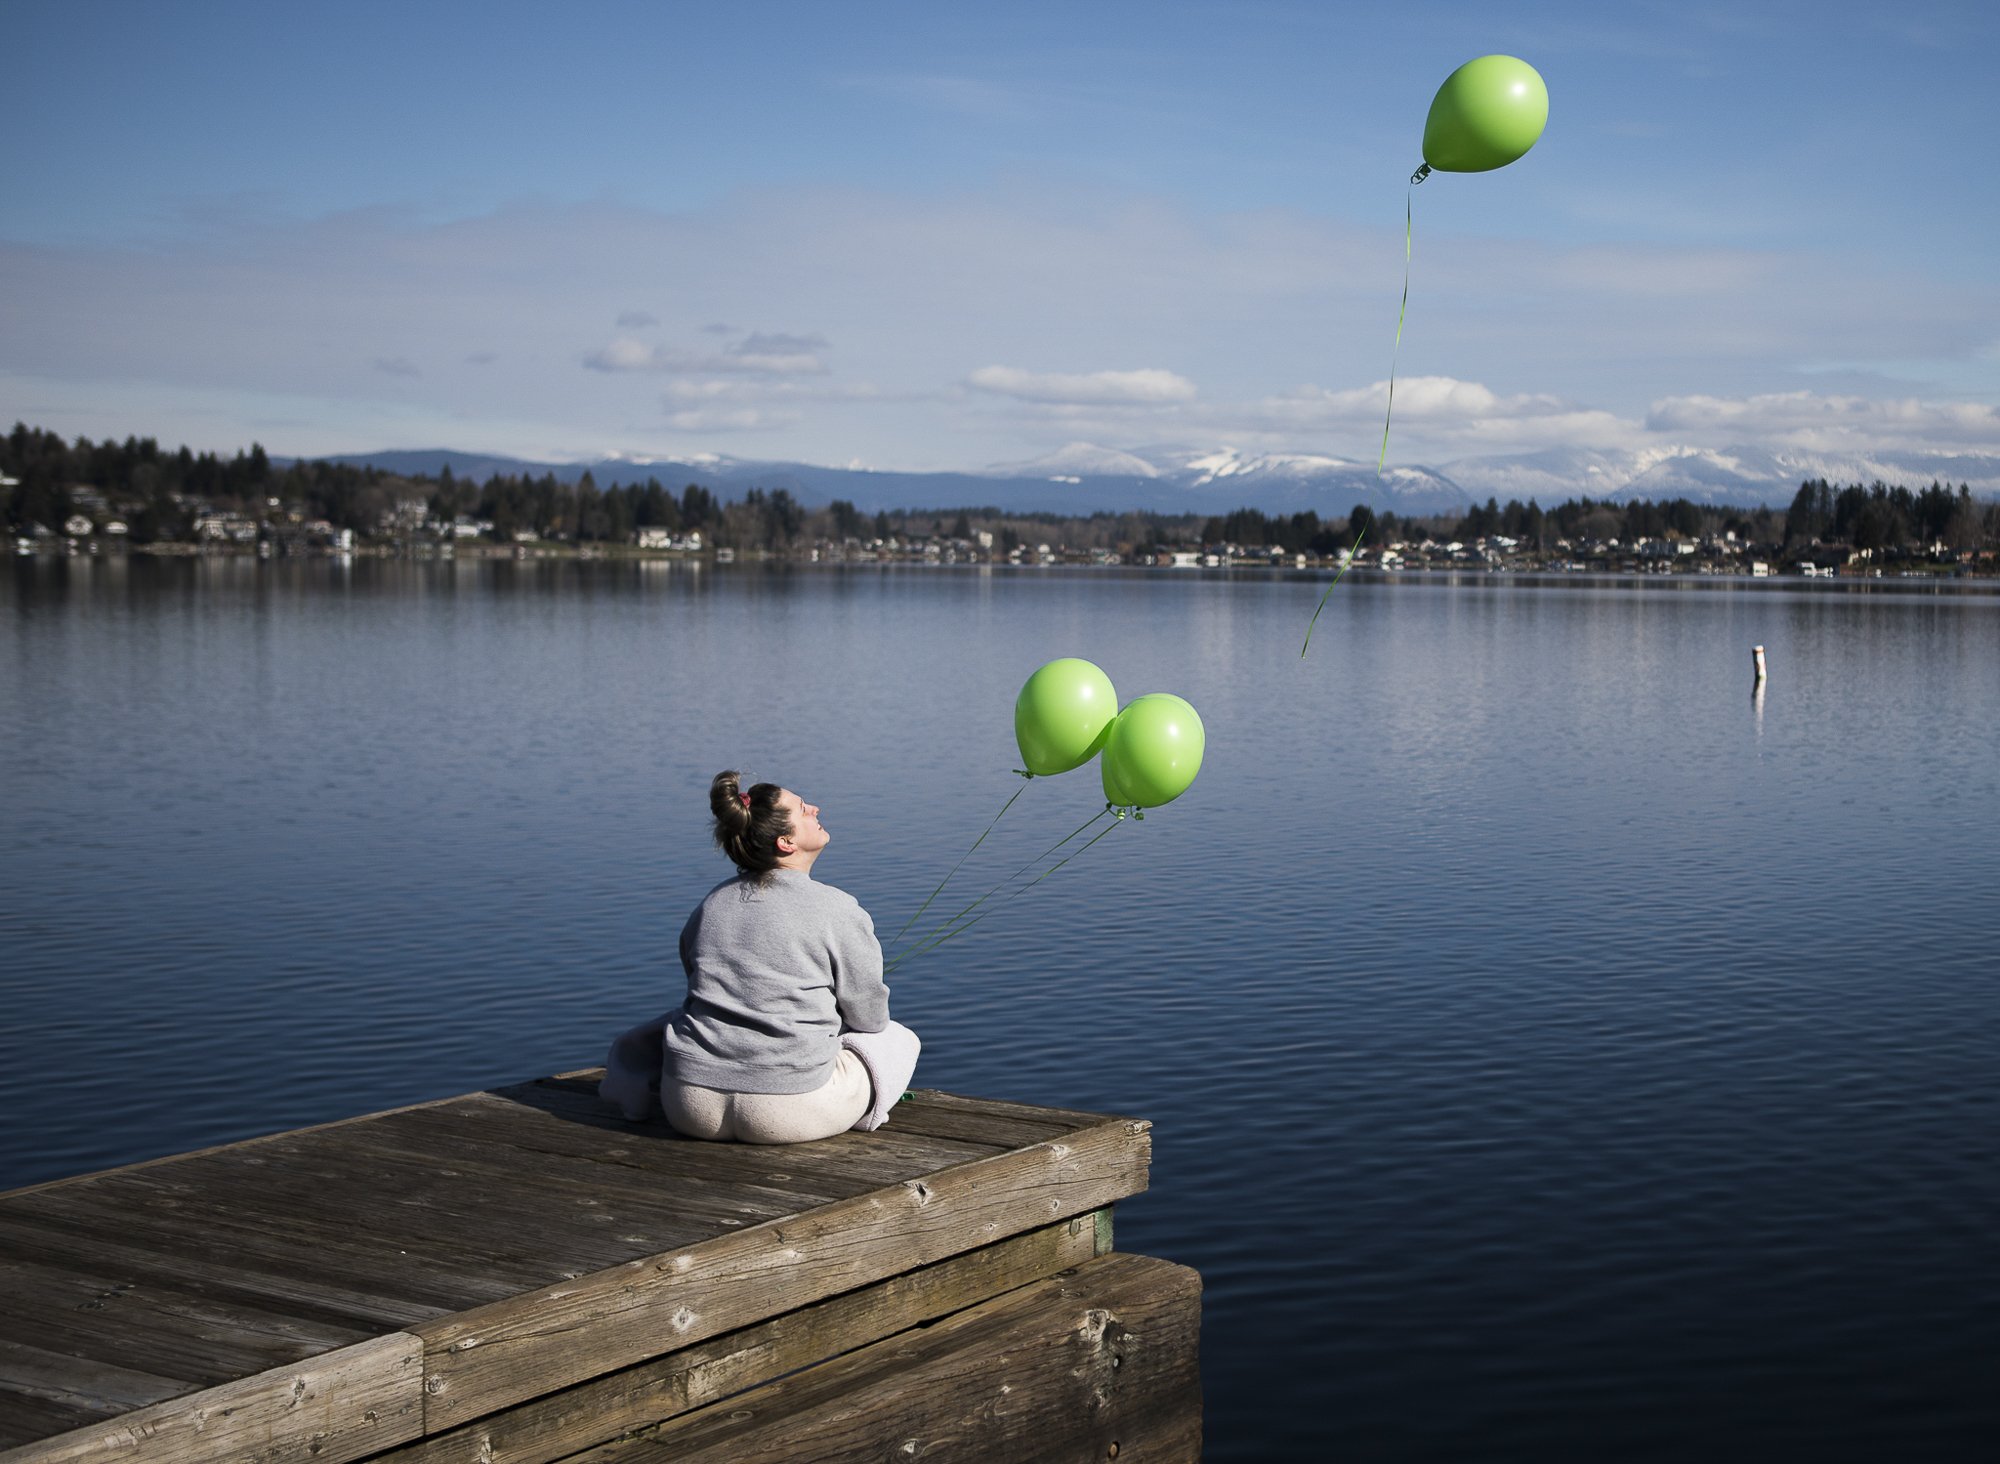  Ashley Olson releases green balloons from the dock at Davies Beach in memory of her brother, Joey Mell, who overdosed a year ago on Feb. 23, 2021 in Lake Stevens, Washington. Green was Mell’s favorite color and Olson describes her brother as “gorgeo